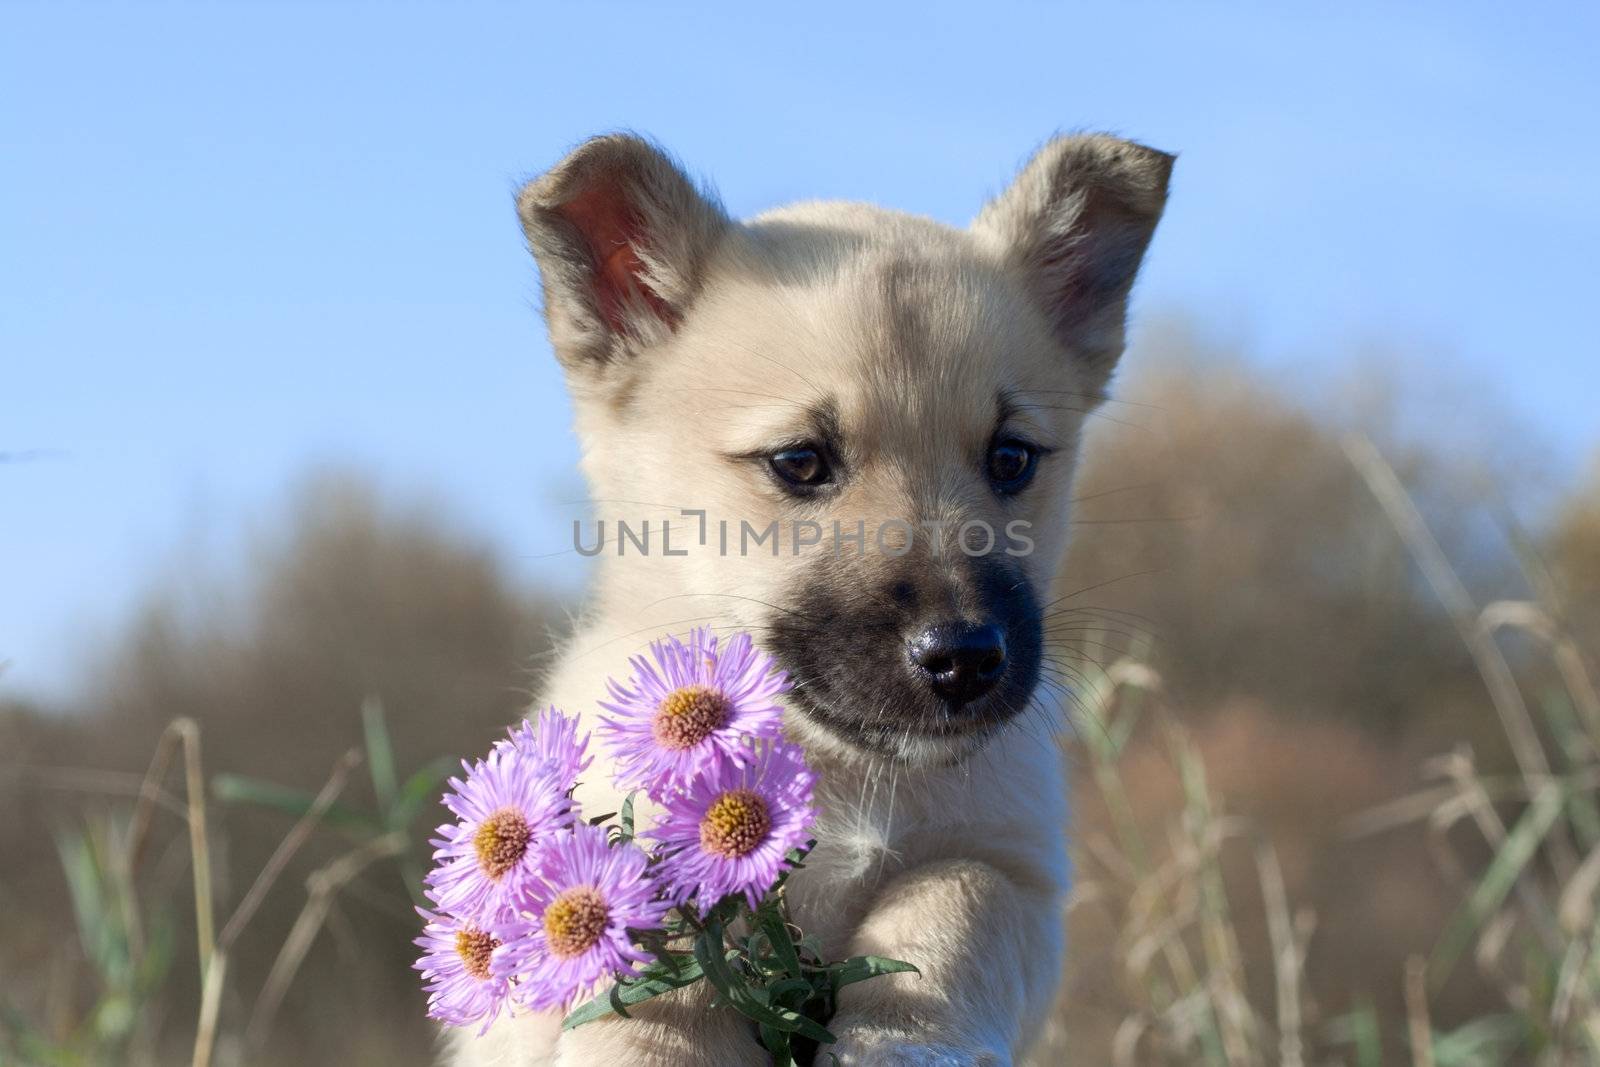 puppy dog hold flowers in forefoots by Alekcey